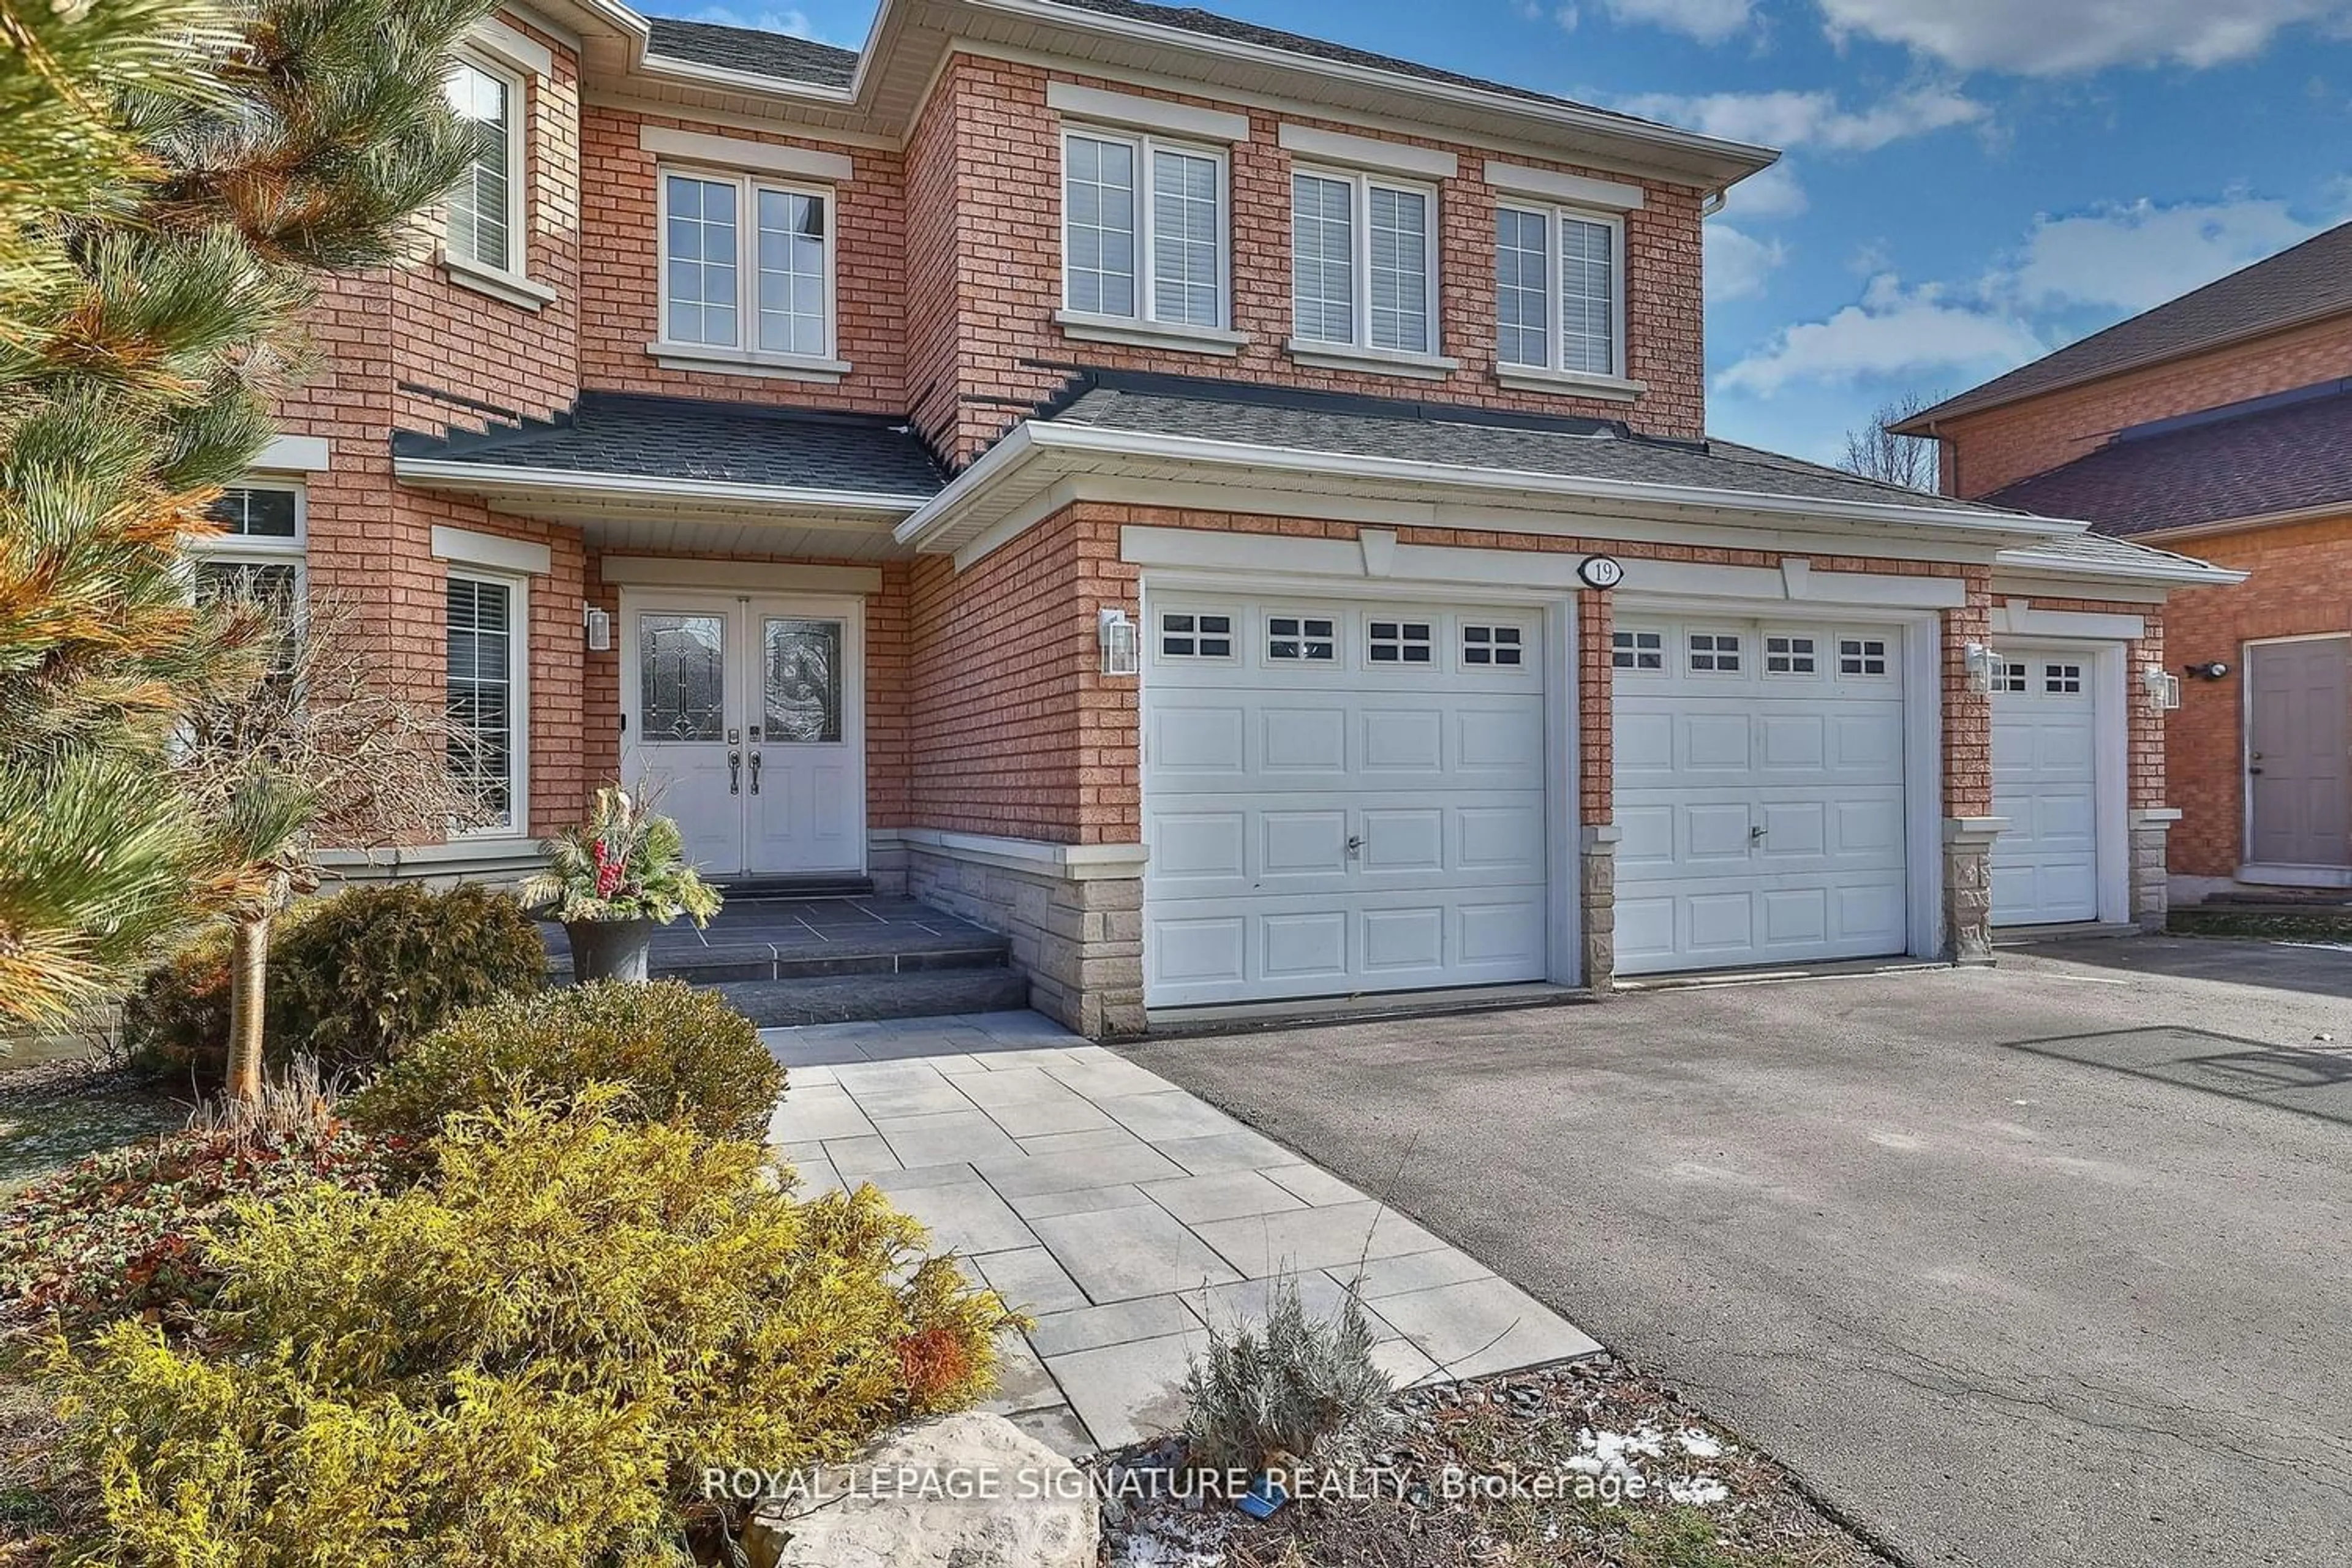 Home with brick exterior material for 19 Lemsford Dr, Markham Ontario L3S 3T8